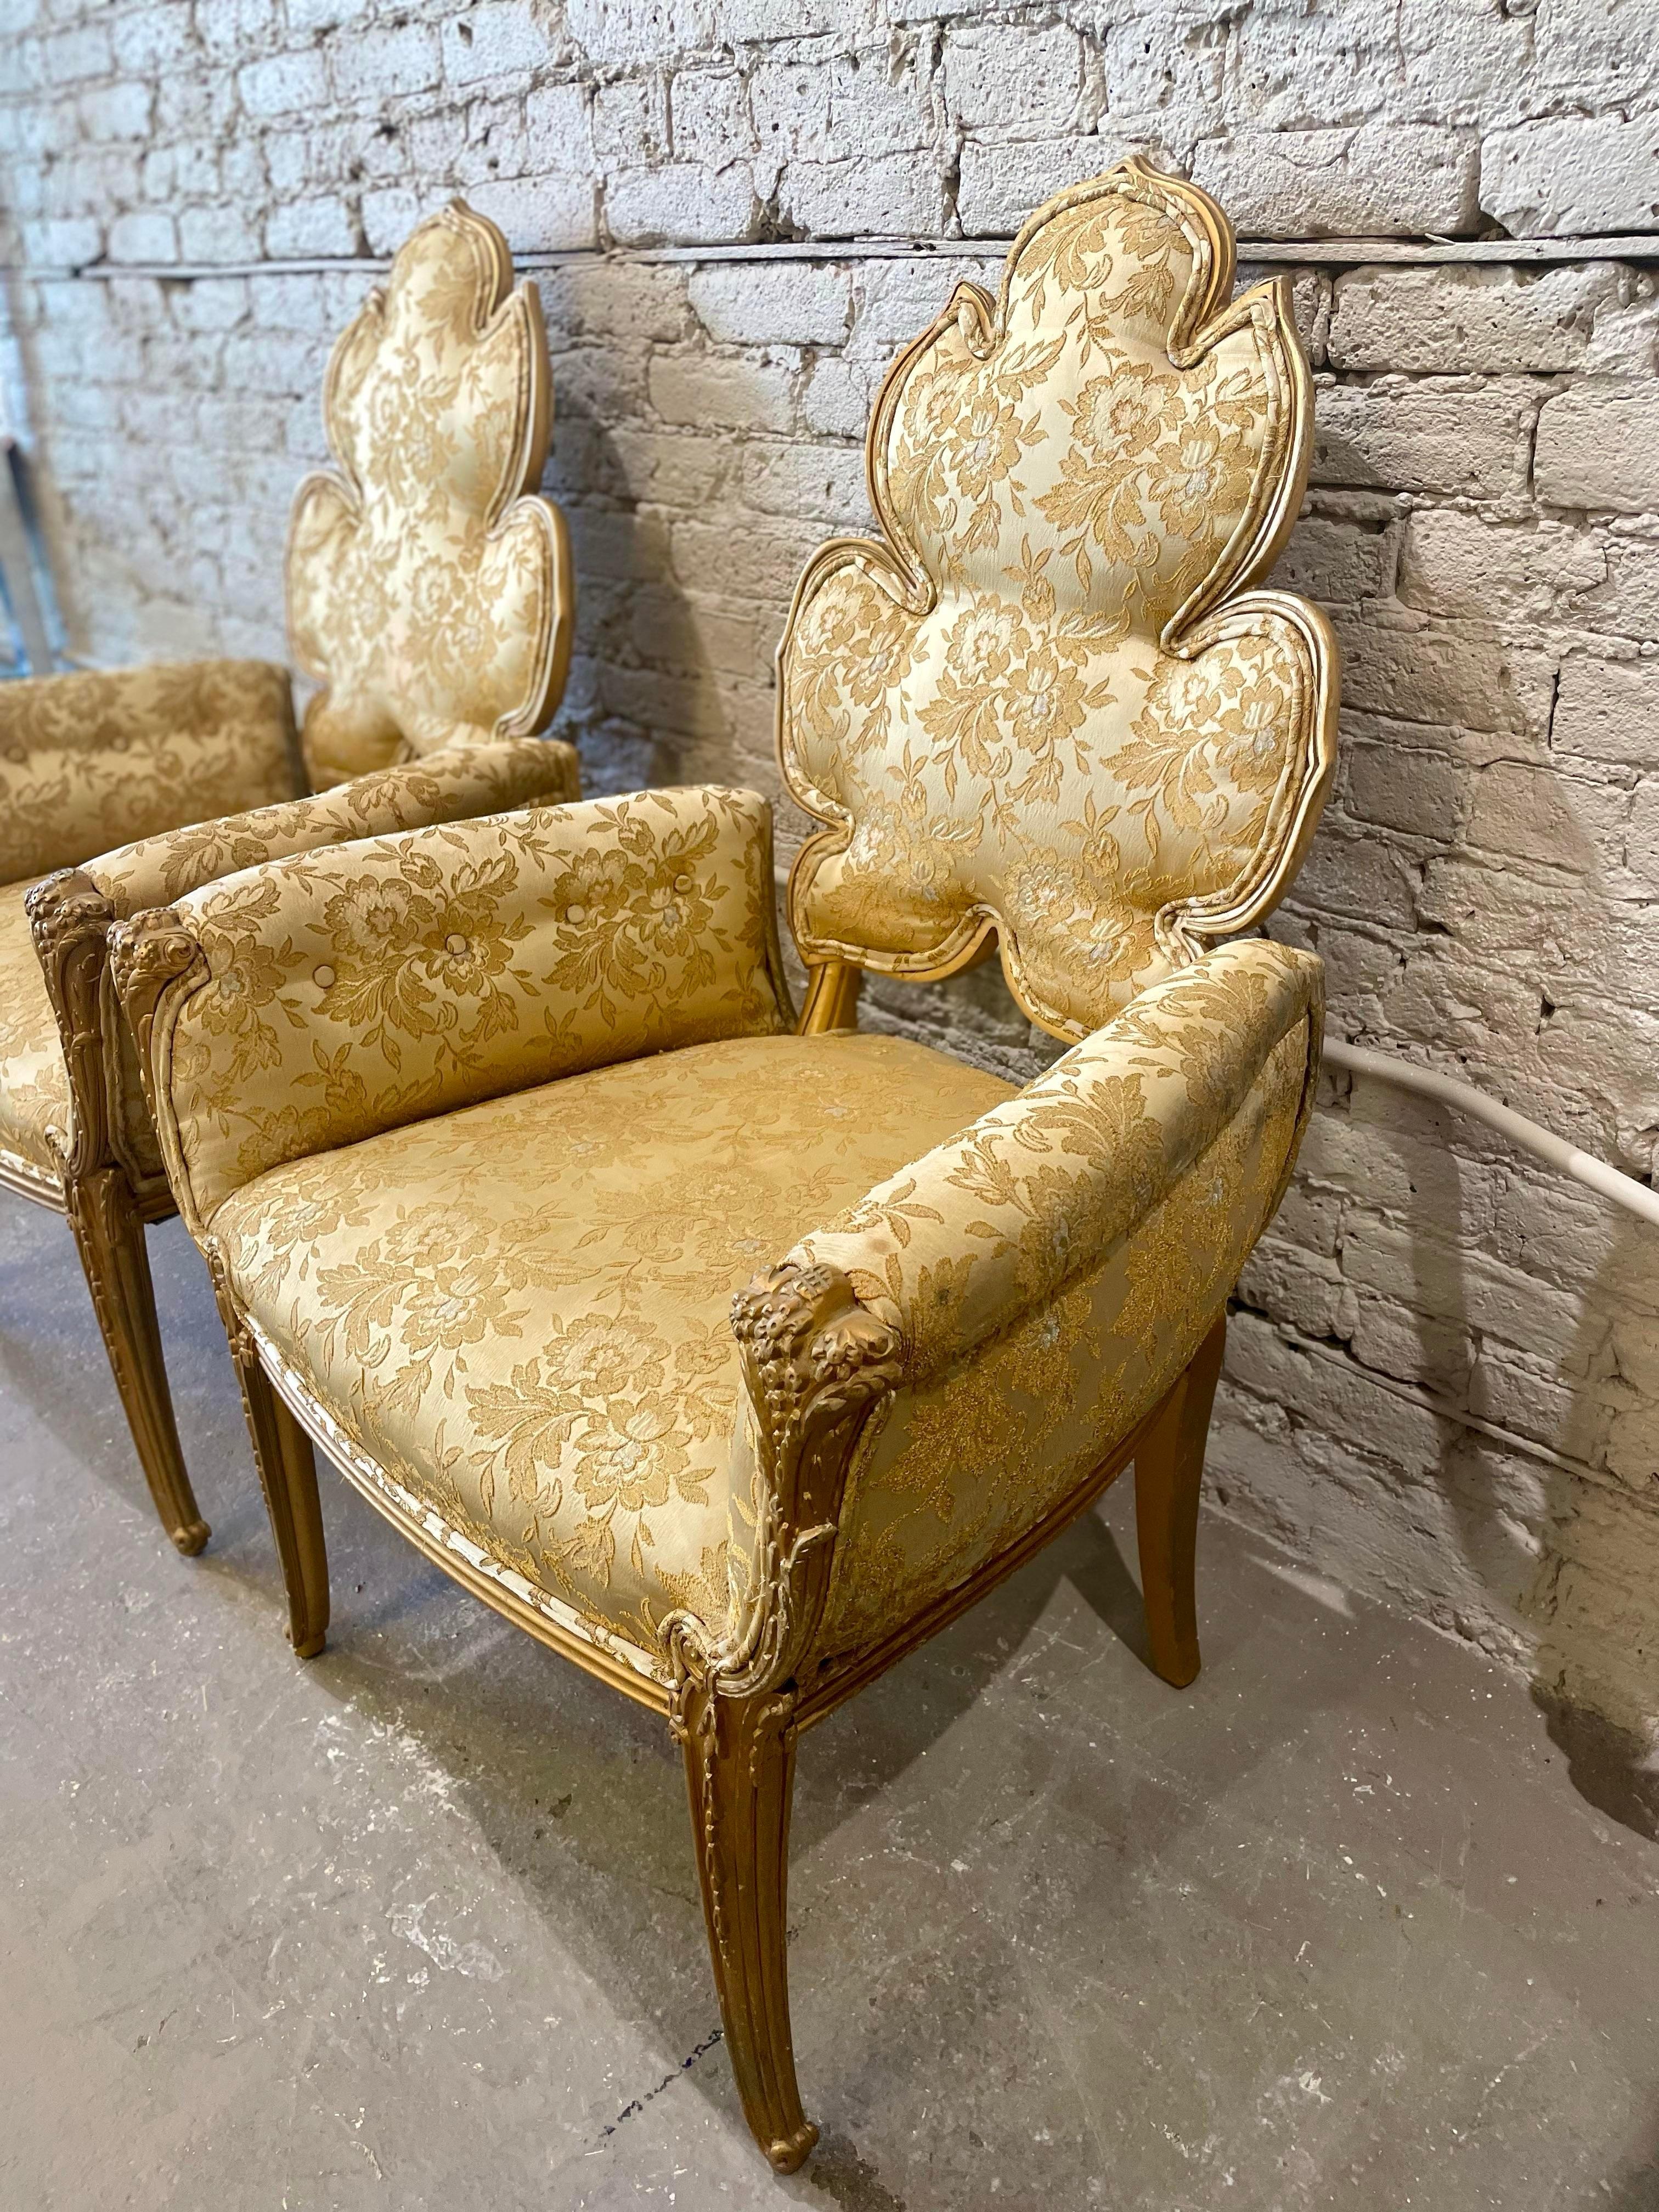 Mid-20th Century 1940s Grosfeld House Leaf Flower Chairs - a Pair For Sale